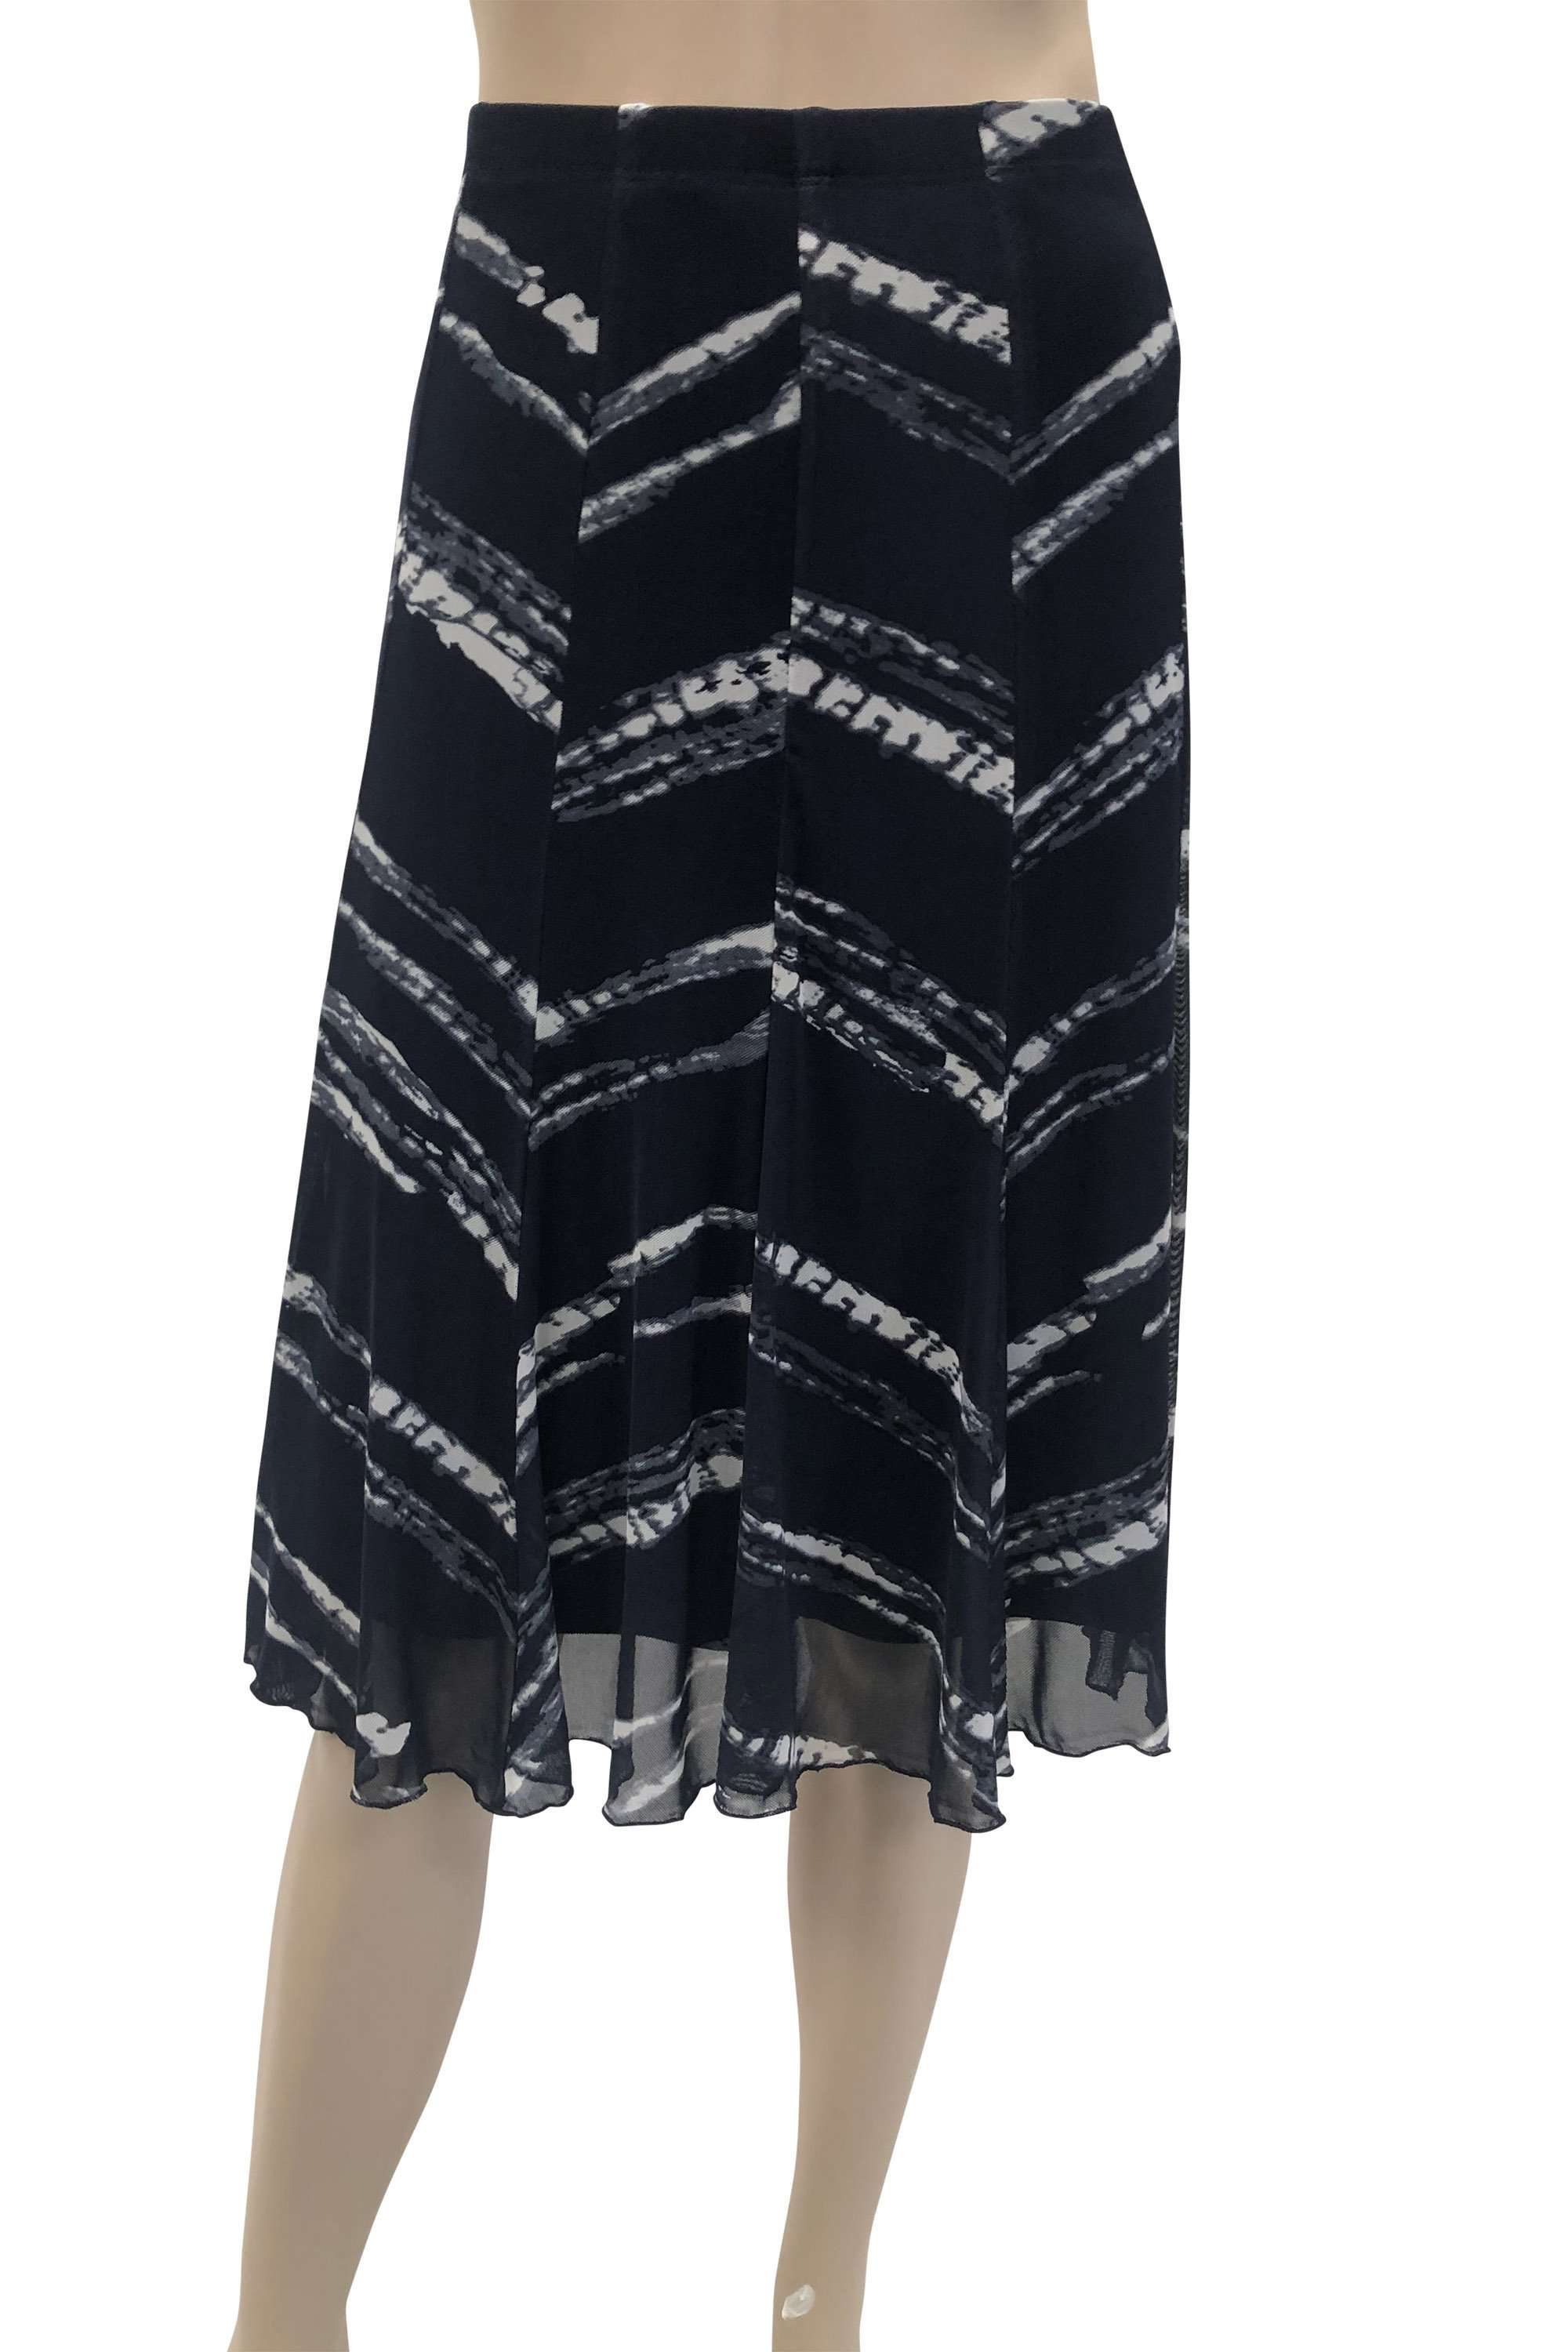 Women's Skirts On Sale Canada Navy Fully Lined Skirt NOW 70 OFF Skirts XLARGE Sizes Made In Canada - Yvonne Marie - Yvonne Marie